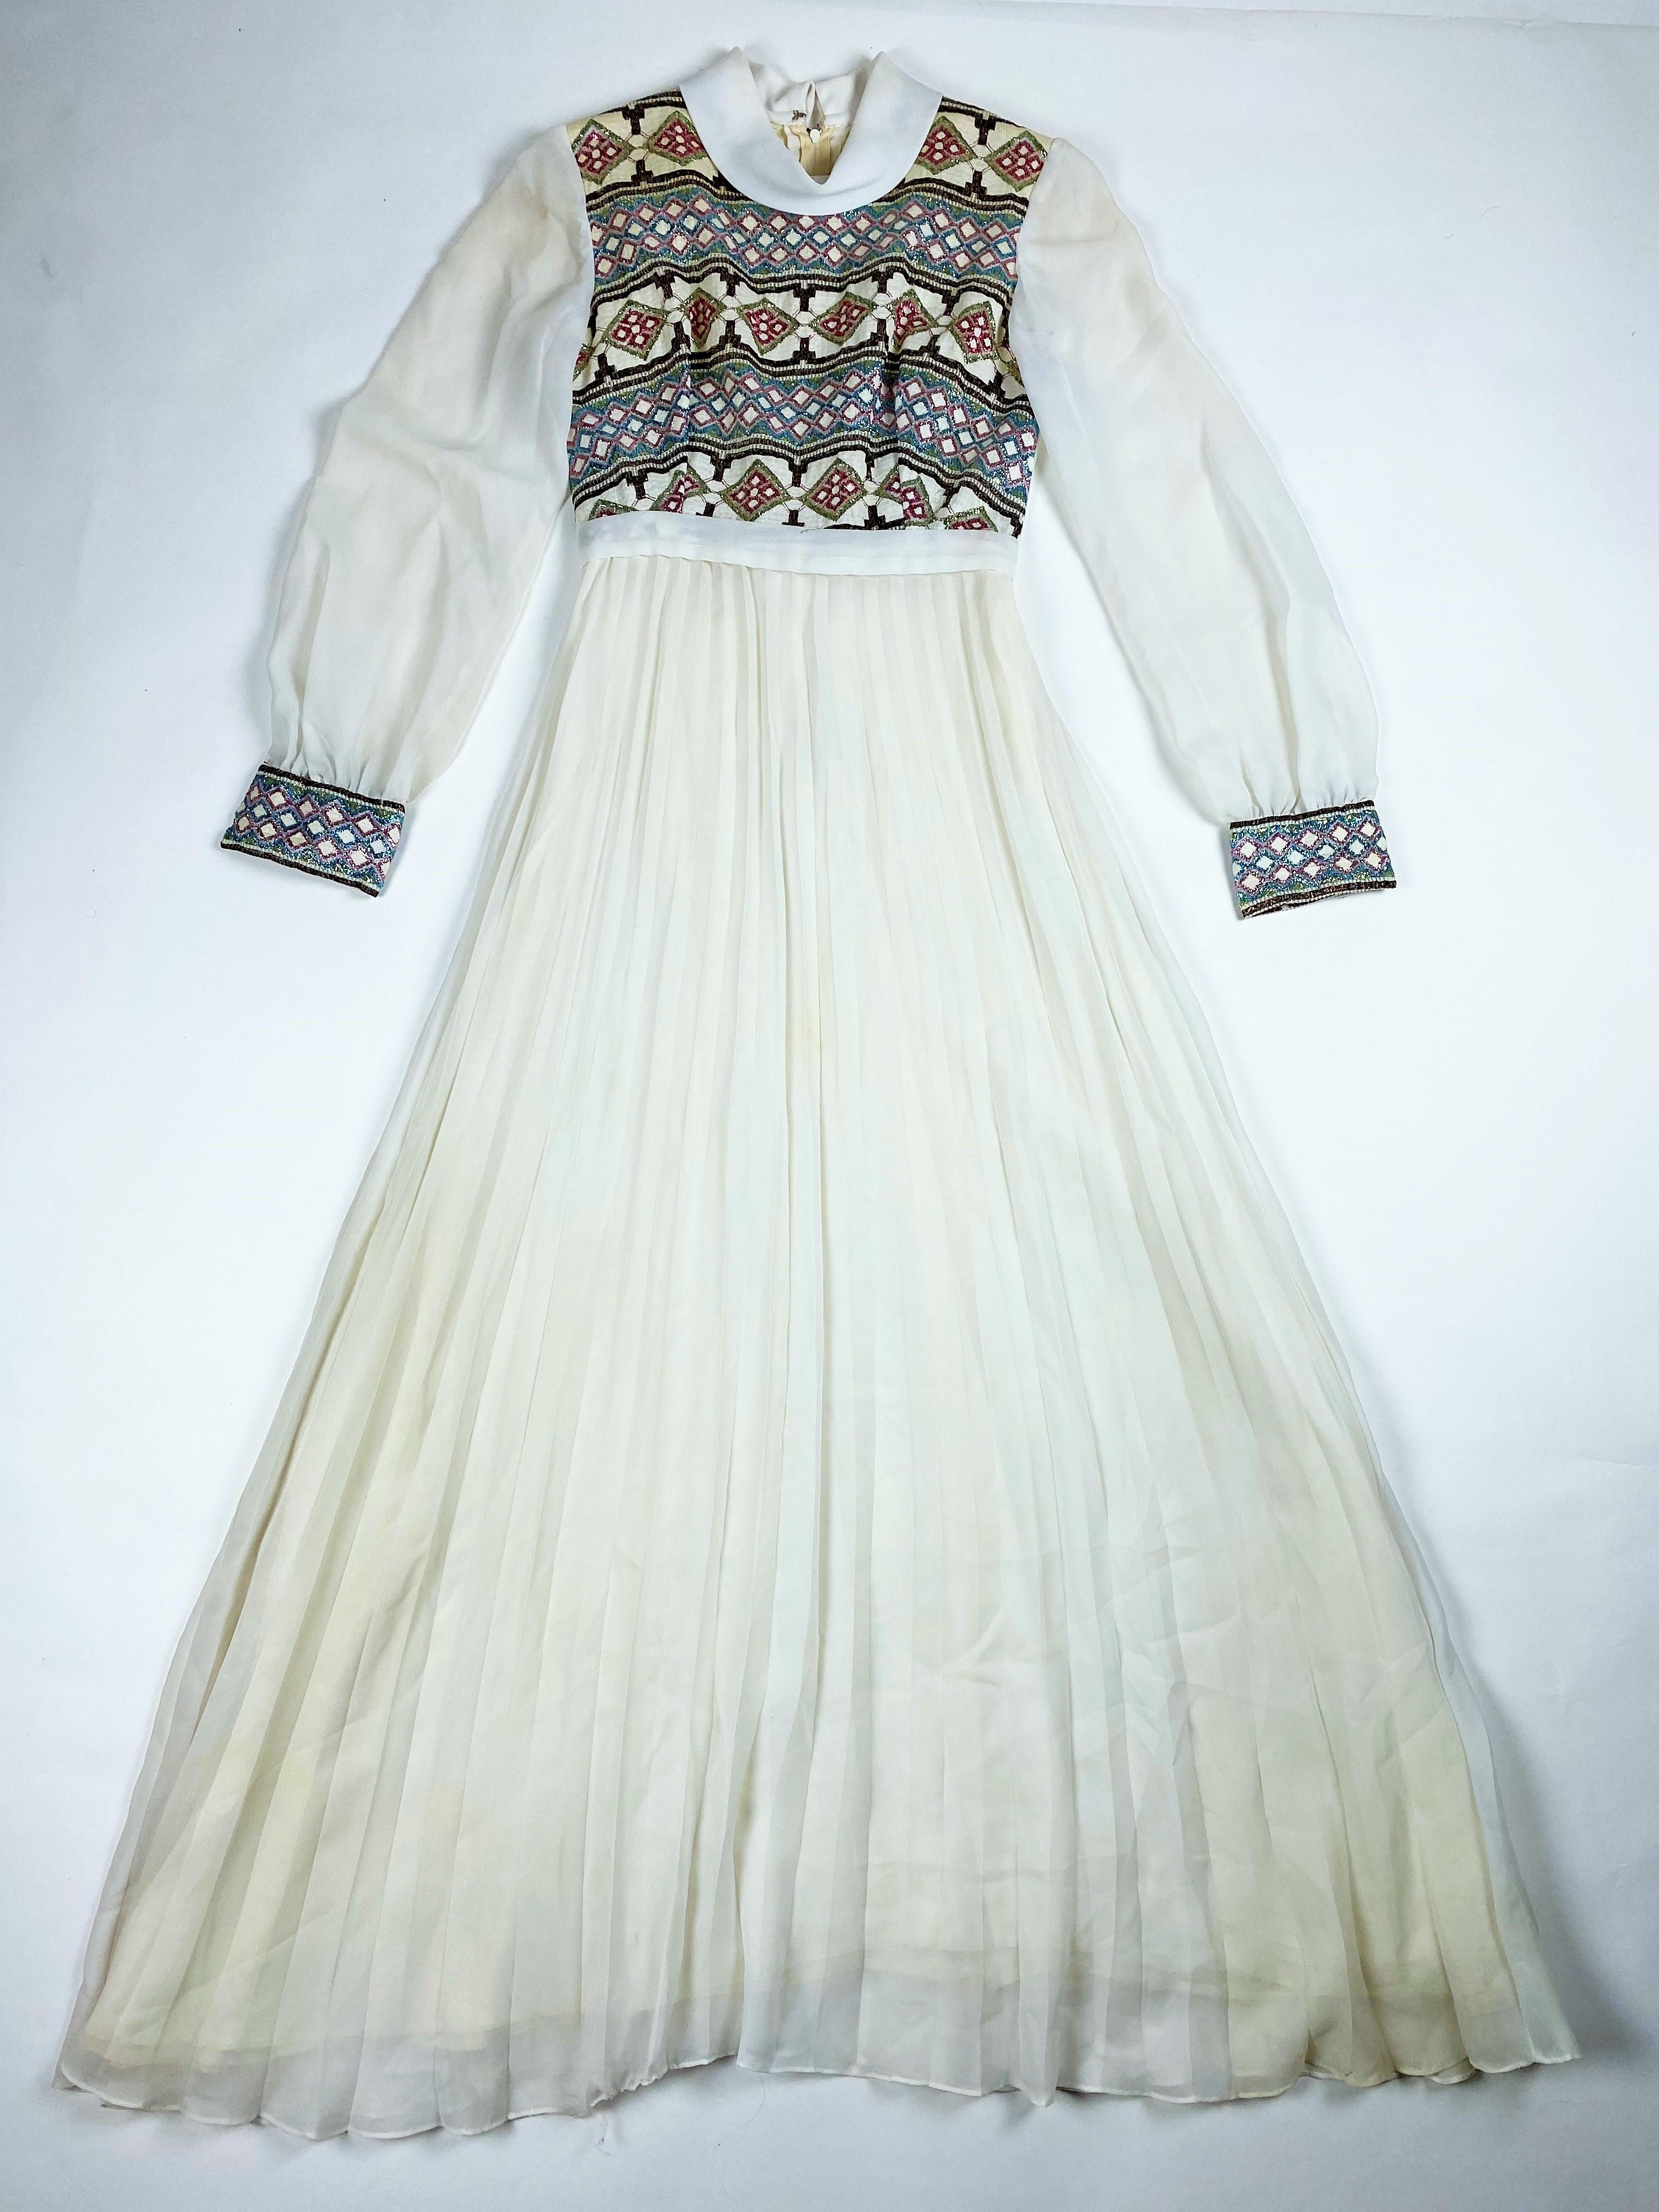 Nylon and lurex crepe formal dress - France Circa 1972 In Good Condition For Sale In Toulon, FR